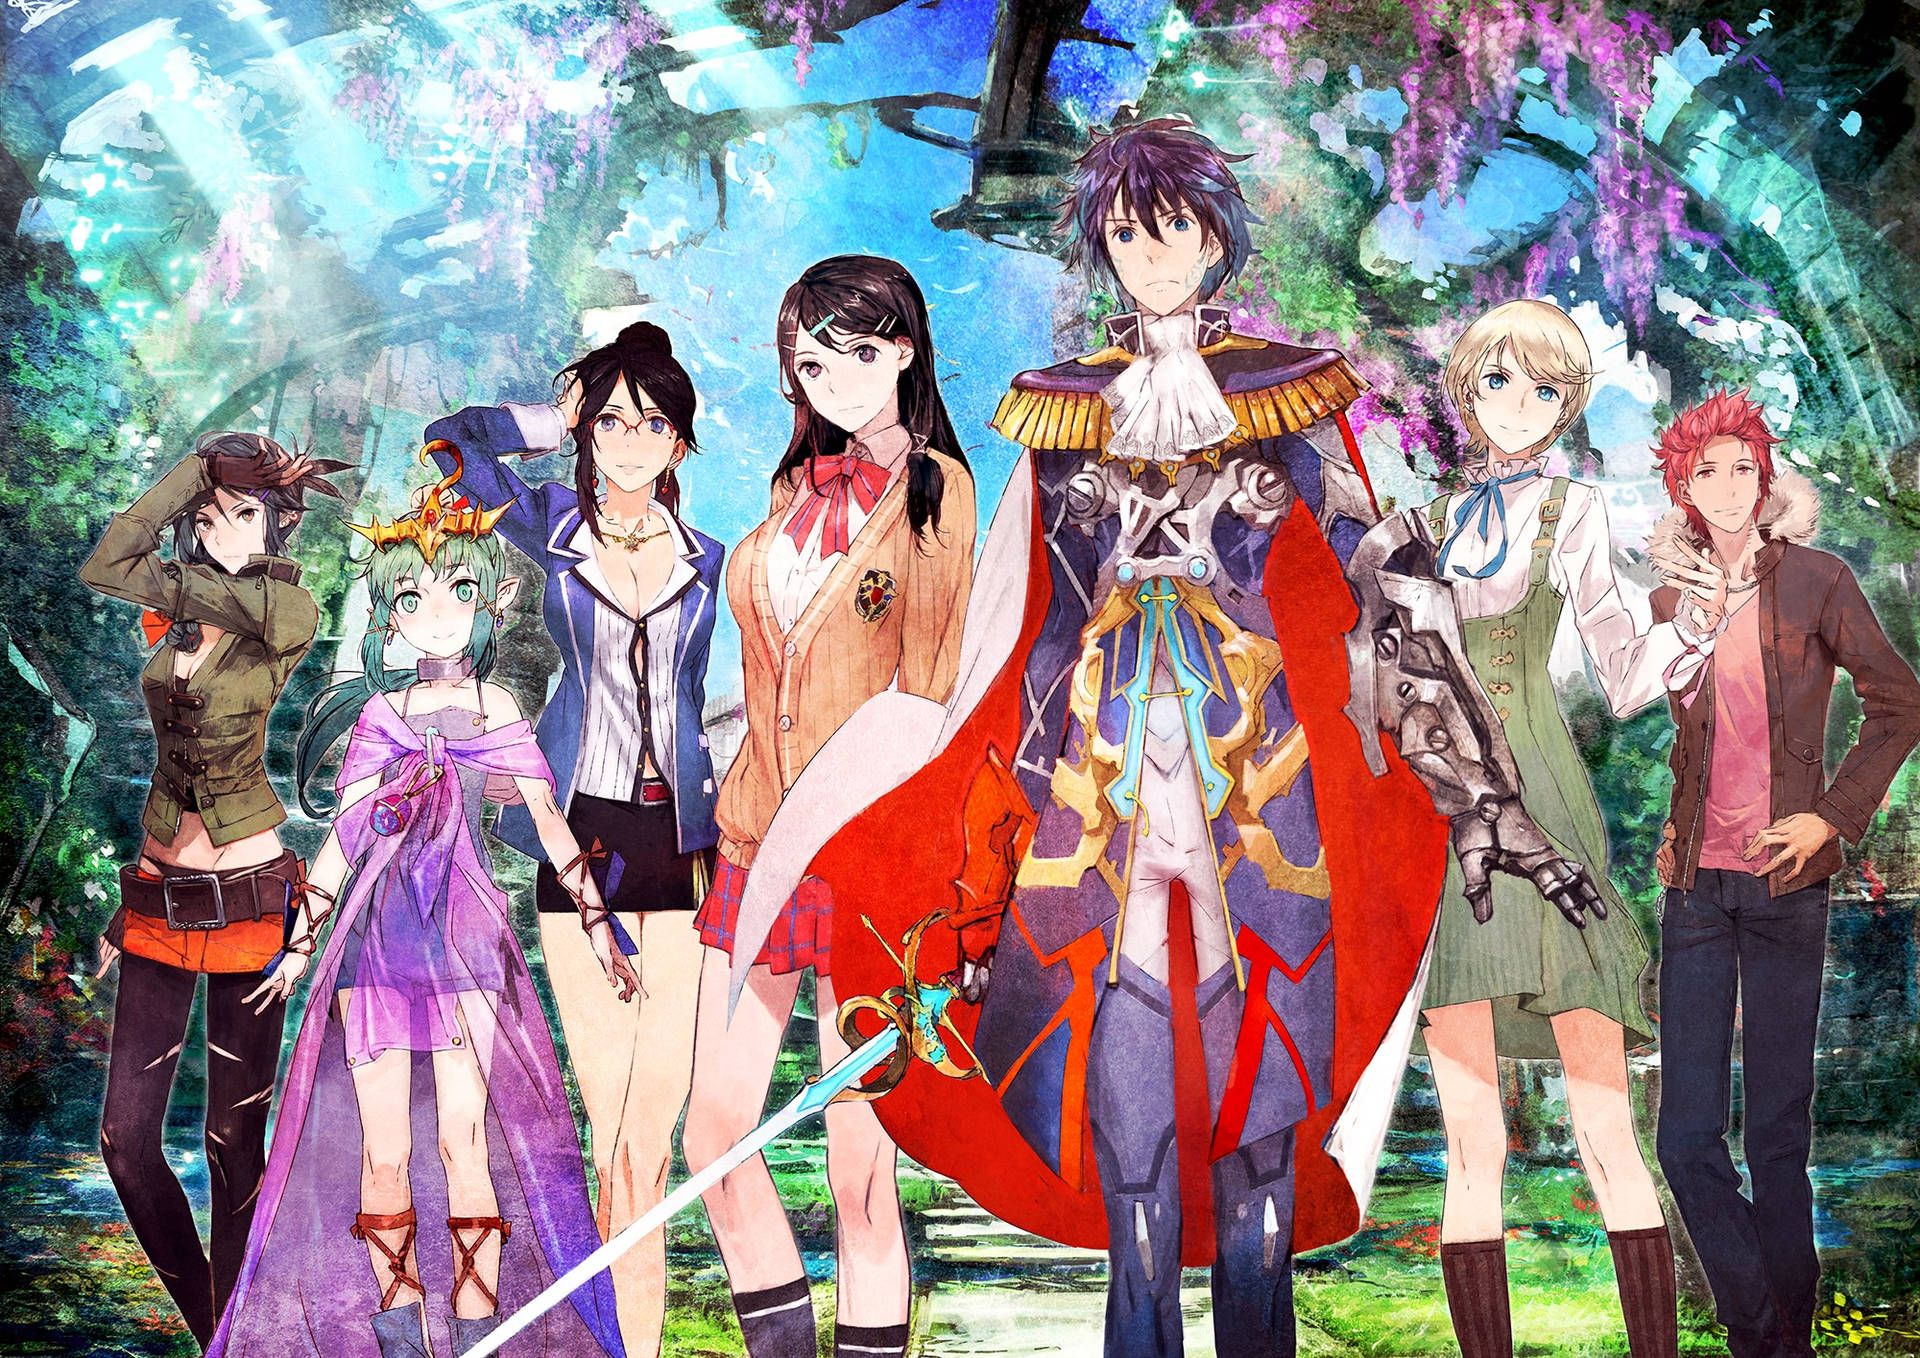 Tokyo Mirage Sessions With Itsuki Taking Center Stage